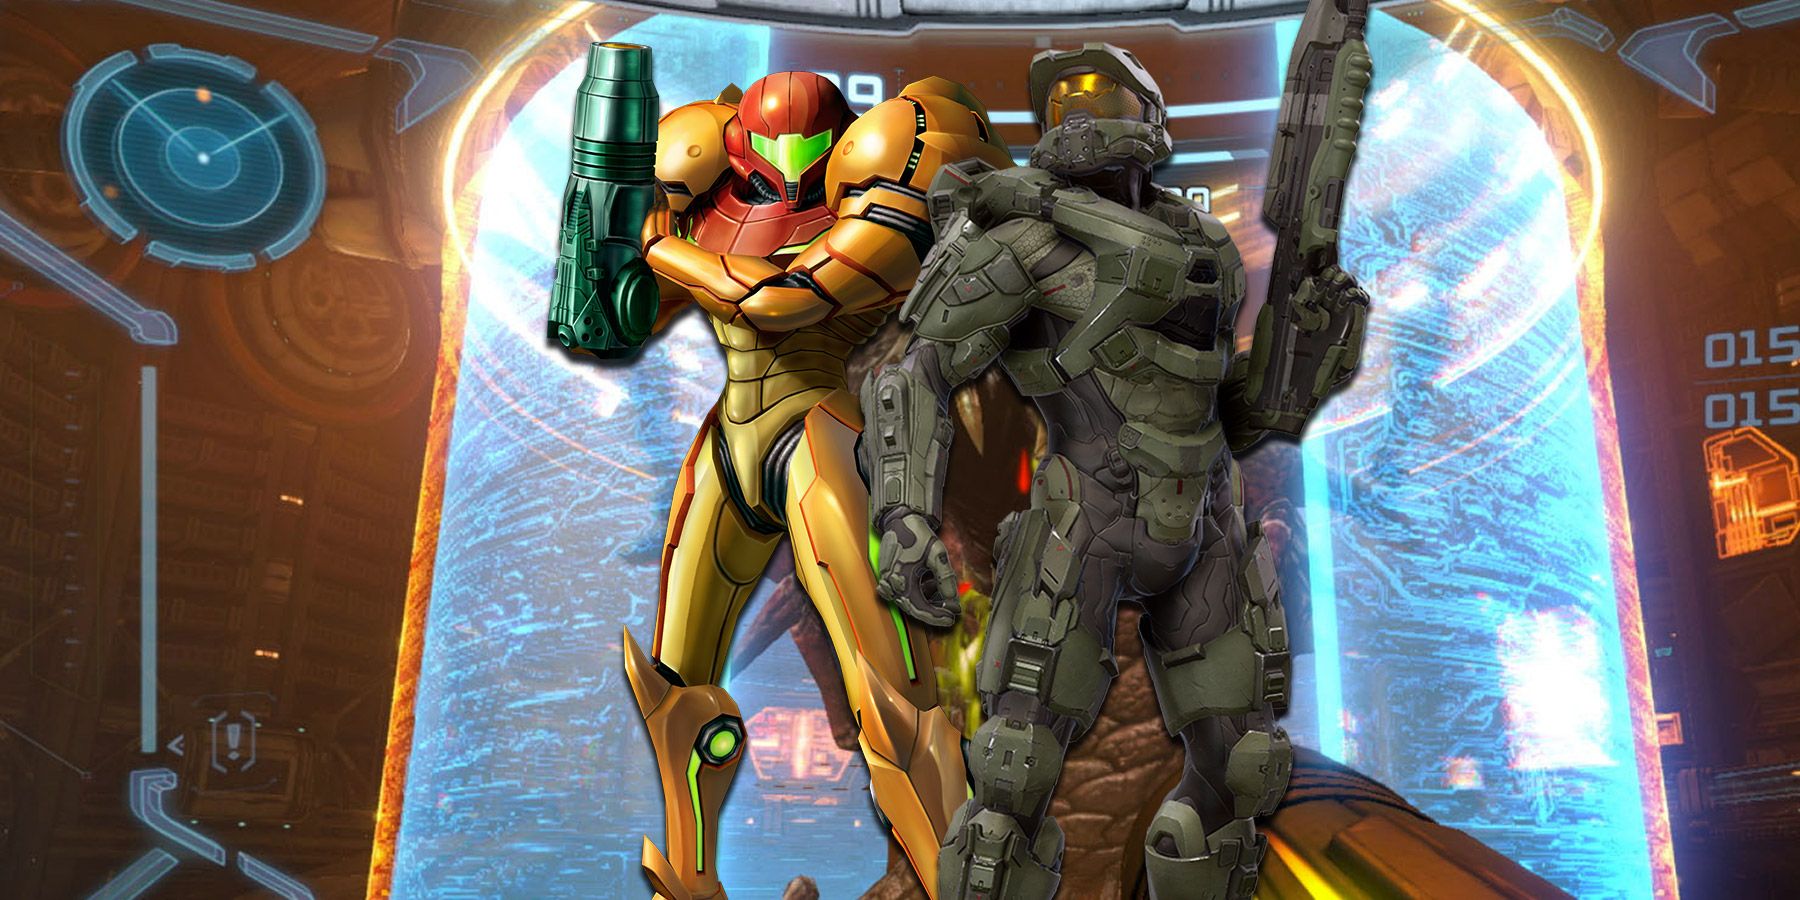 Metroid Better Use Halo Controversial Narrative